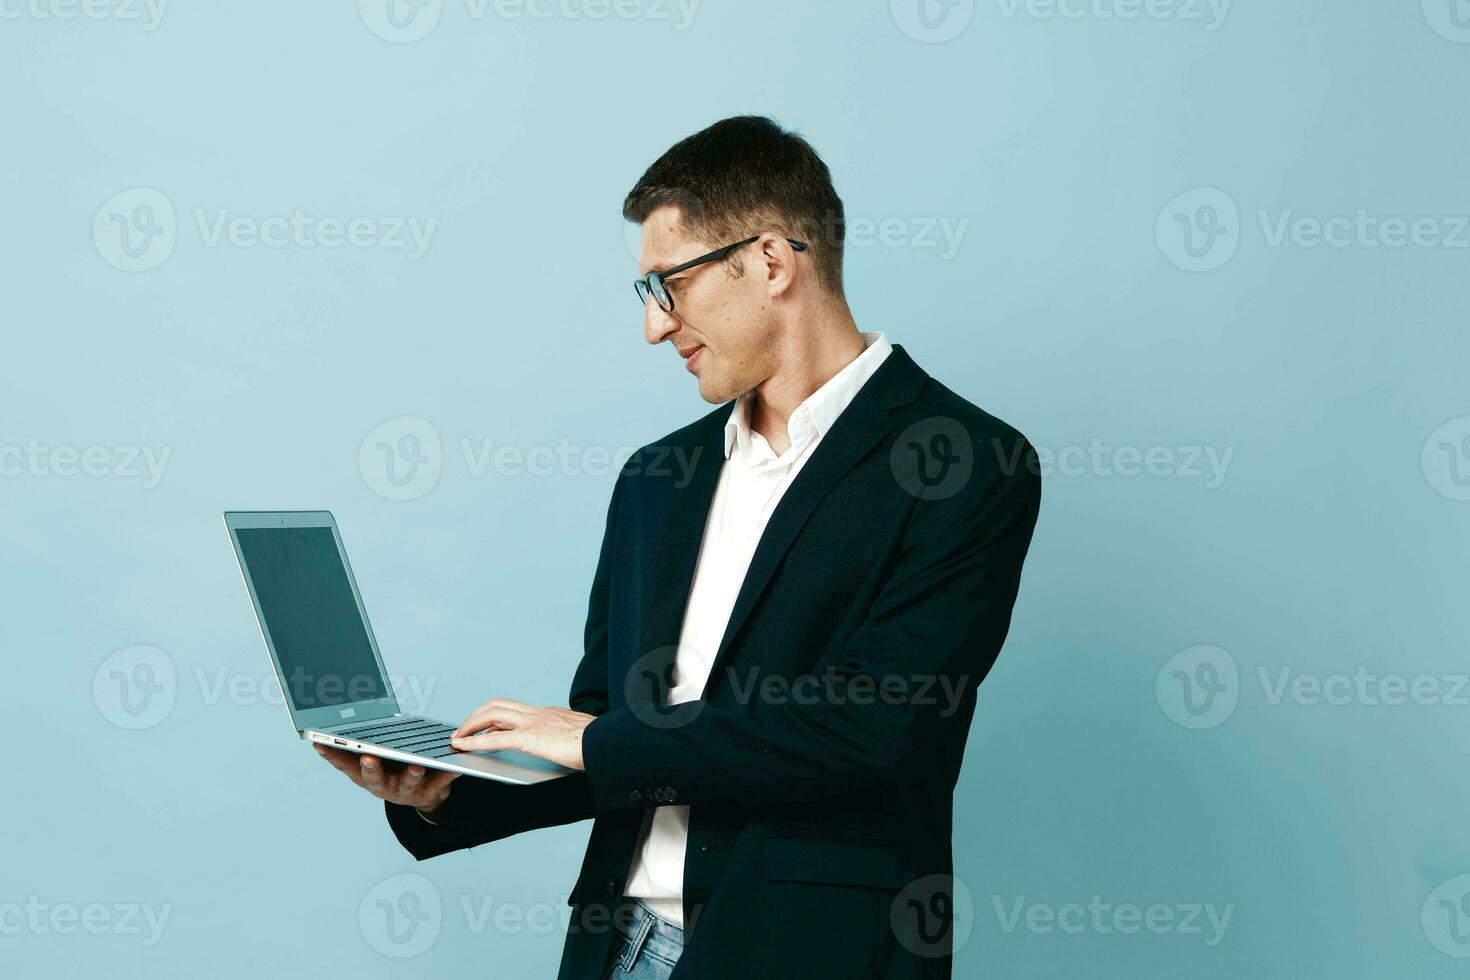 Modern man job business background using adult laptop computer working businessman young office photo